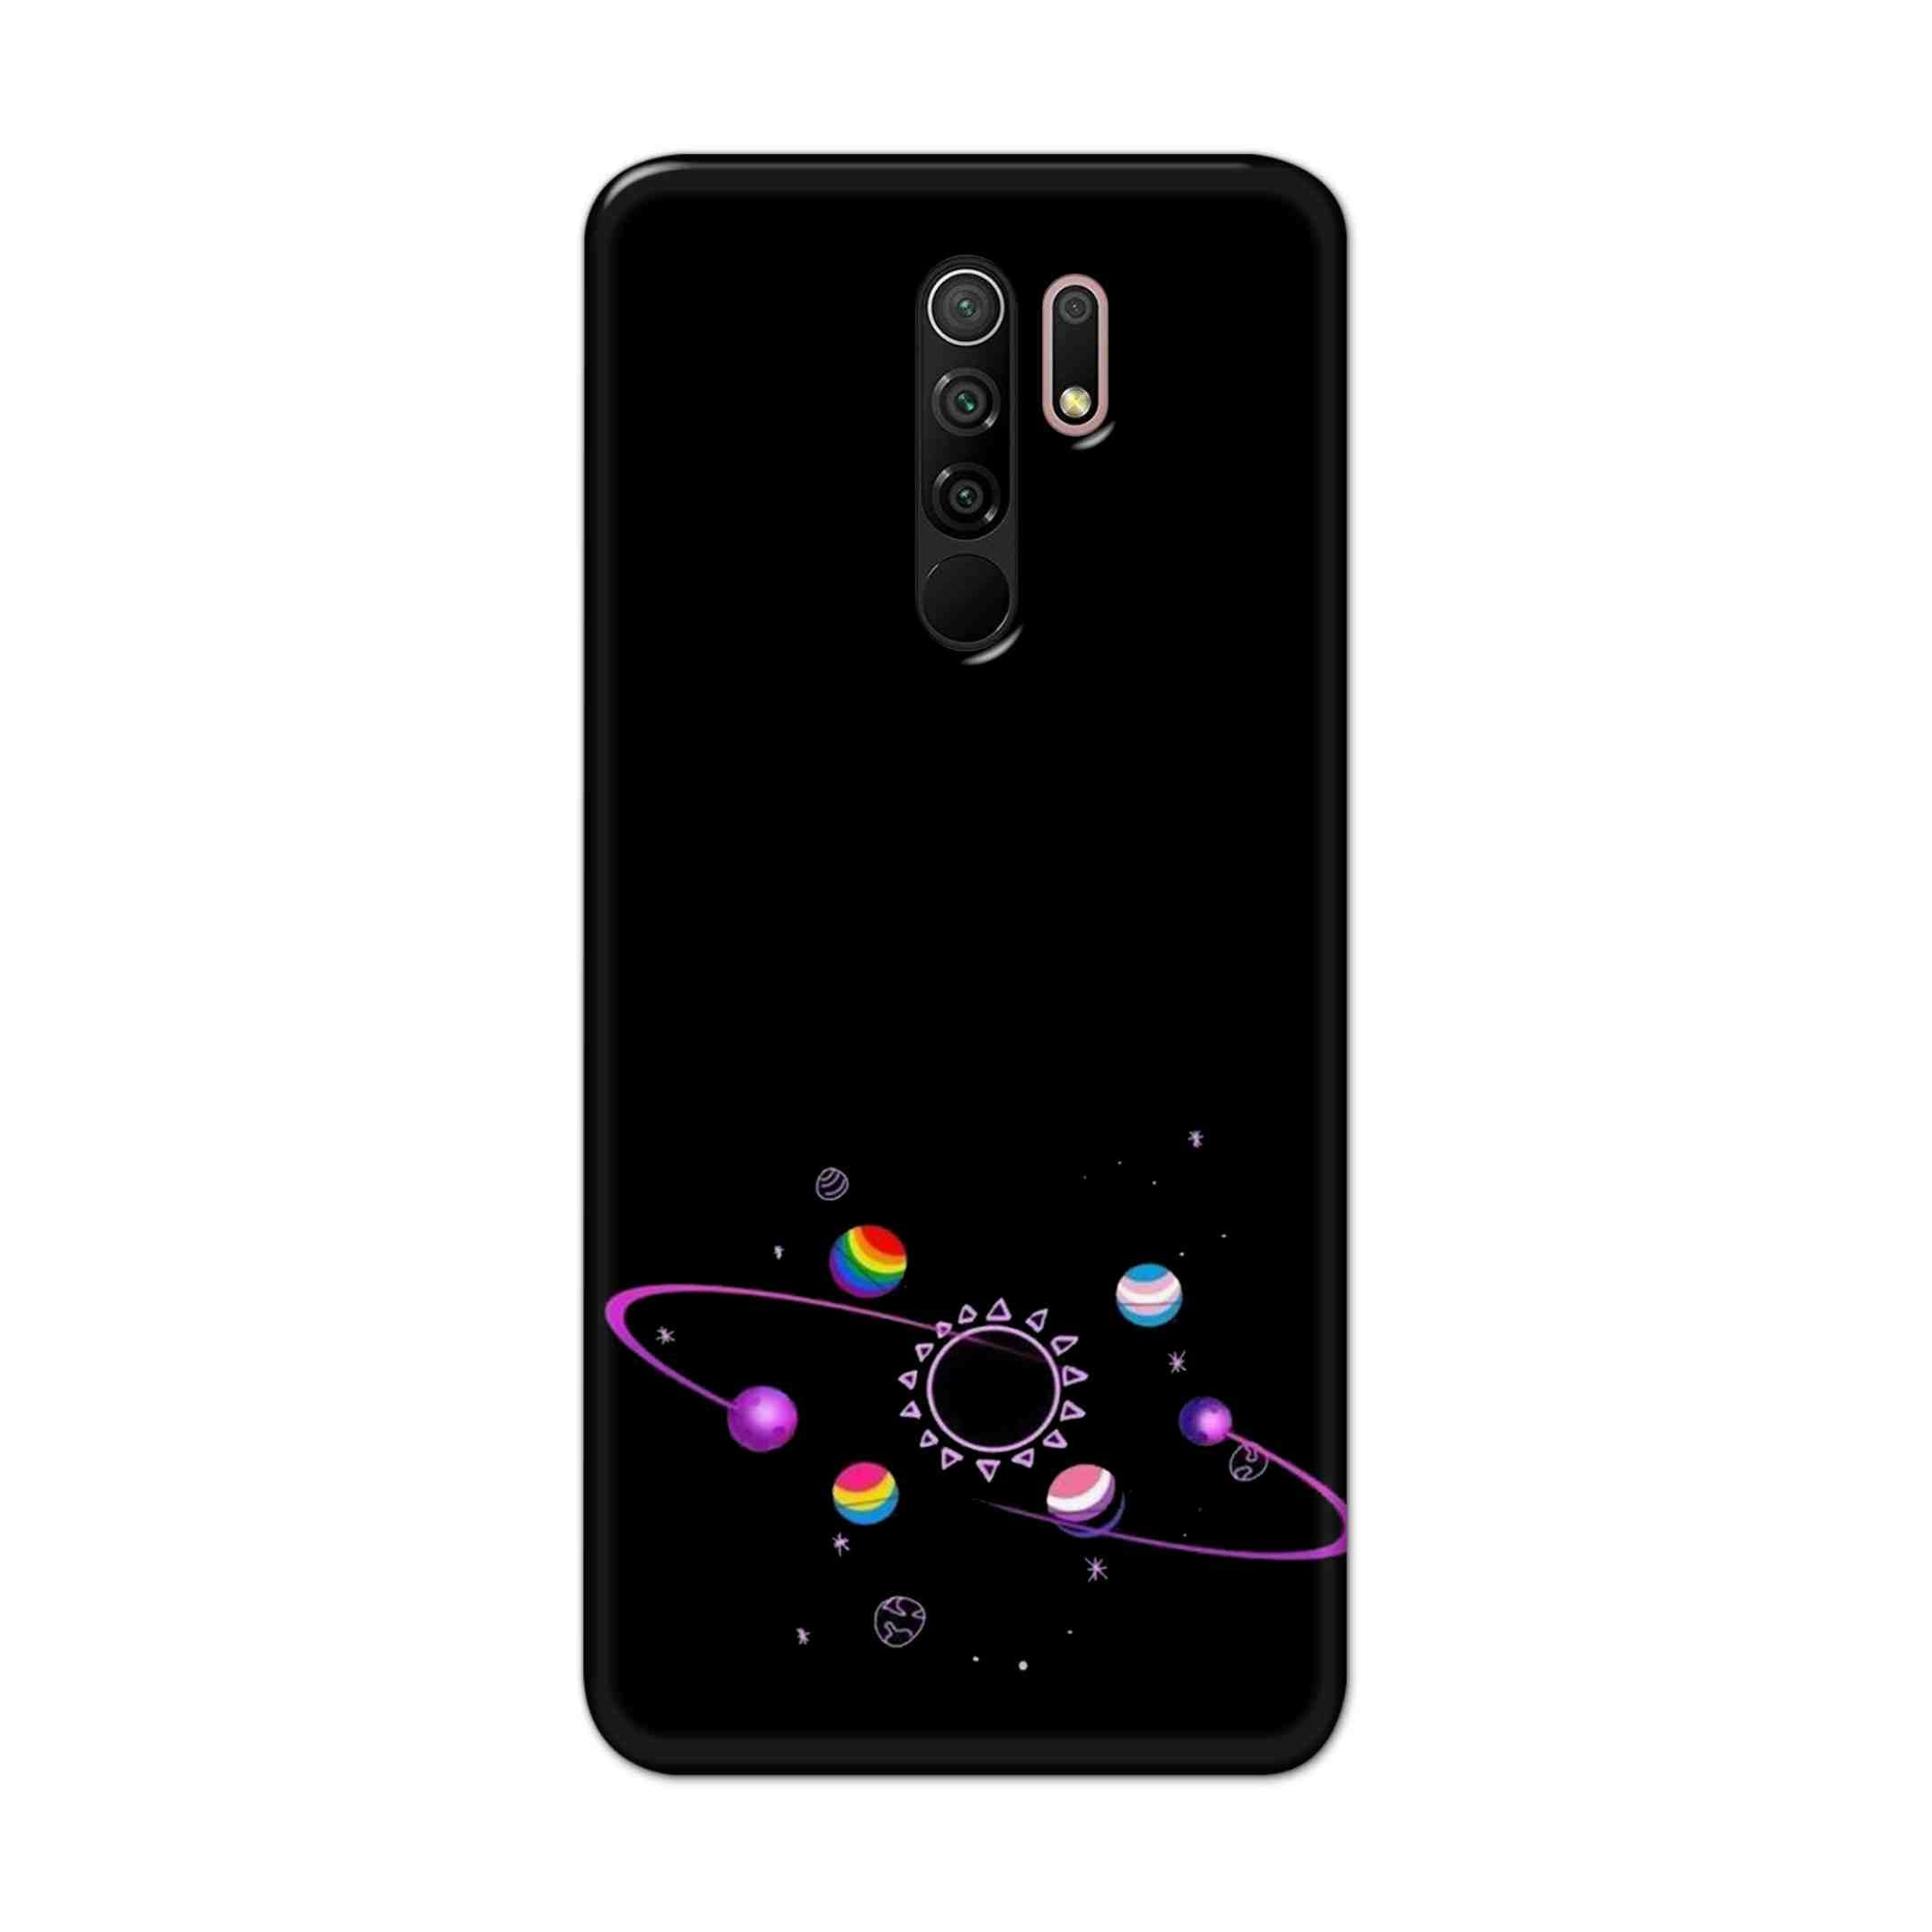 Buy Galaxy Hard Back Mobile Phone Case Cover For Xiaomi Redmi 9 Prime Online